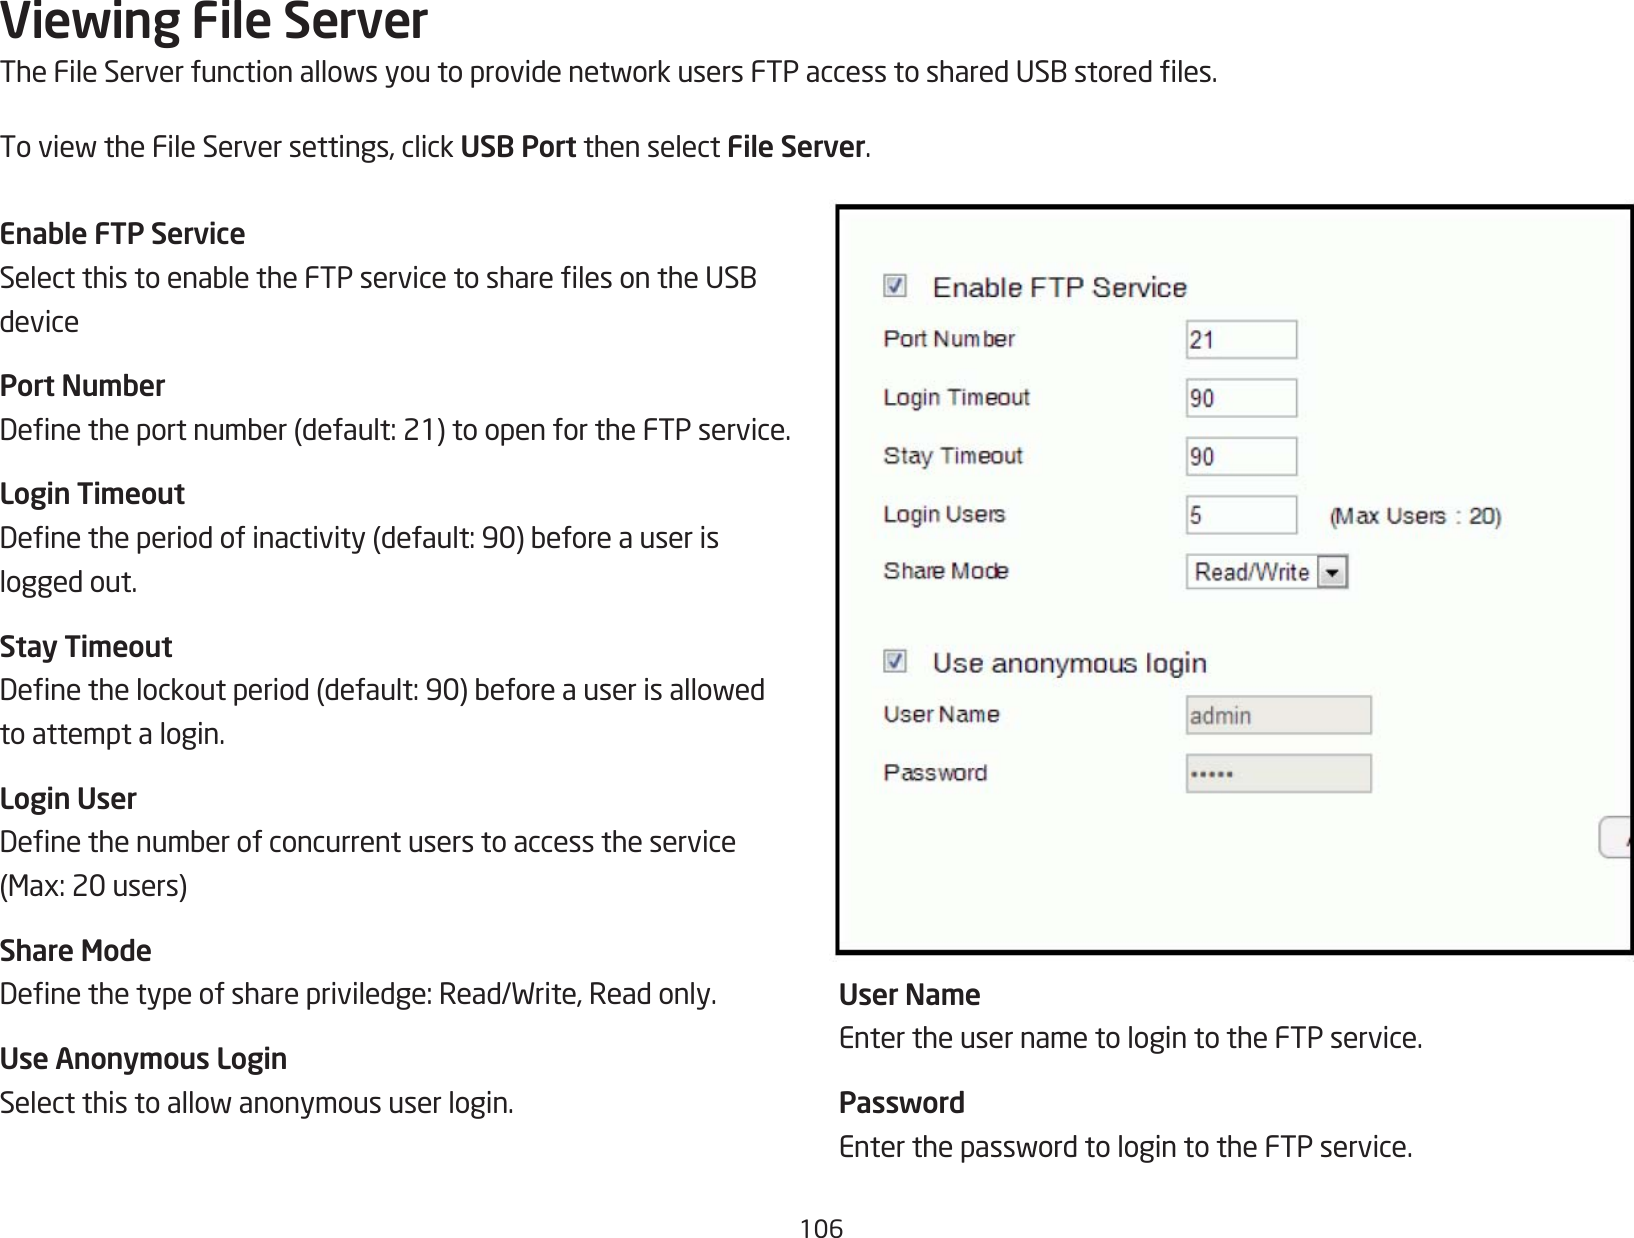 106Viewing File ServerTheFileServerfunctionallowsyoutoprovidenetworkusersFTPaccesstosharedUSBstoredles.ToviewtheFileServersettings,clickUSB Port then select File Server.Enable FTP ServiceSelectthistoenabletheFTPservicetosharelesontheUSBdevicePort NumberDenetheportnumber(default:21)toopenfortheFTPservice.Login TimeoutDenetheperiodofinactivity(default:90)beforeauserislogged out.Stay TimeoutDenethelockoutperiod(default:90)beforeauserisallowedto attempt a login.Login UserDenethenumberofconcurrentuserstoaccesstheservice(Max:20users)Share ModeDenethetypeofsharepriviledge:Read/Write,Readonly.Use Anonymous LoginSelectthistoallowanonymoususerlogin.User NameEnter the user name to login to the FTP service.PasswordEnterthepasswordtologintotheFTPservice.